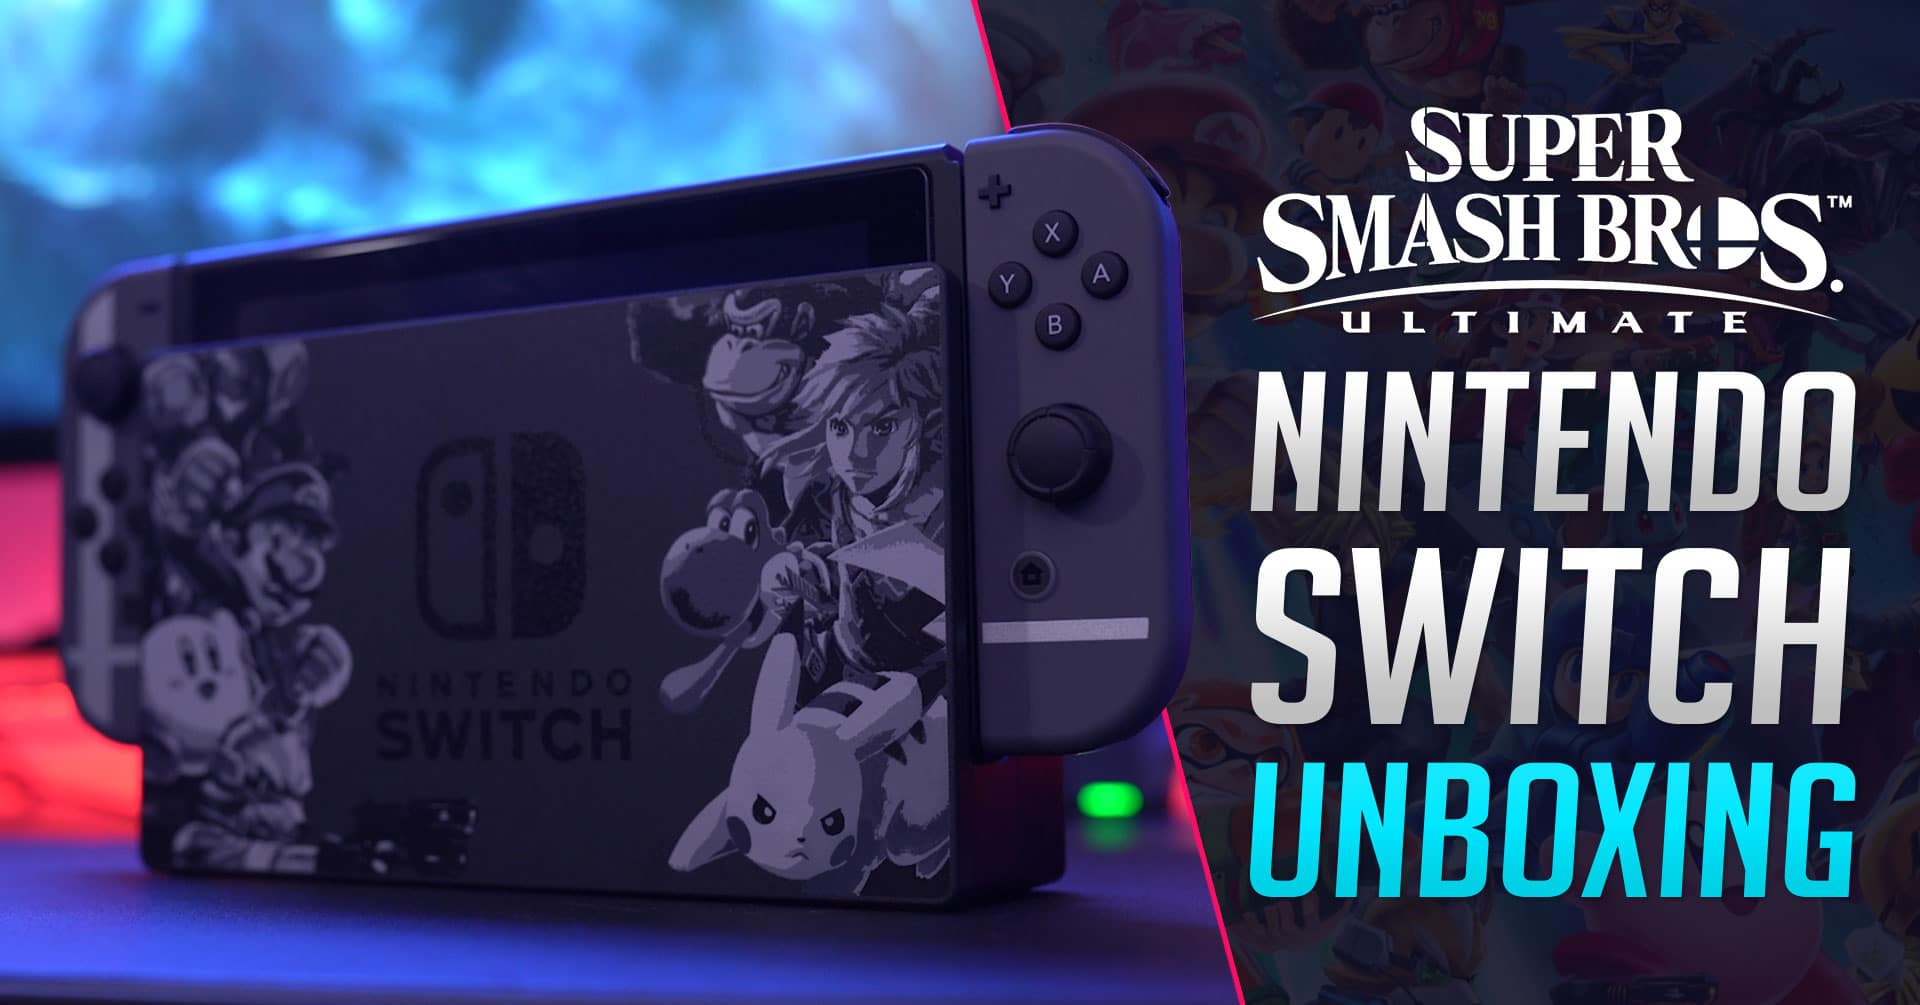 Nintendo Switch | Unboxing Gaming • Bros. Smash Anime Review Edition - Technology & Super Ultimate FuryPixel® • 